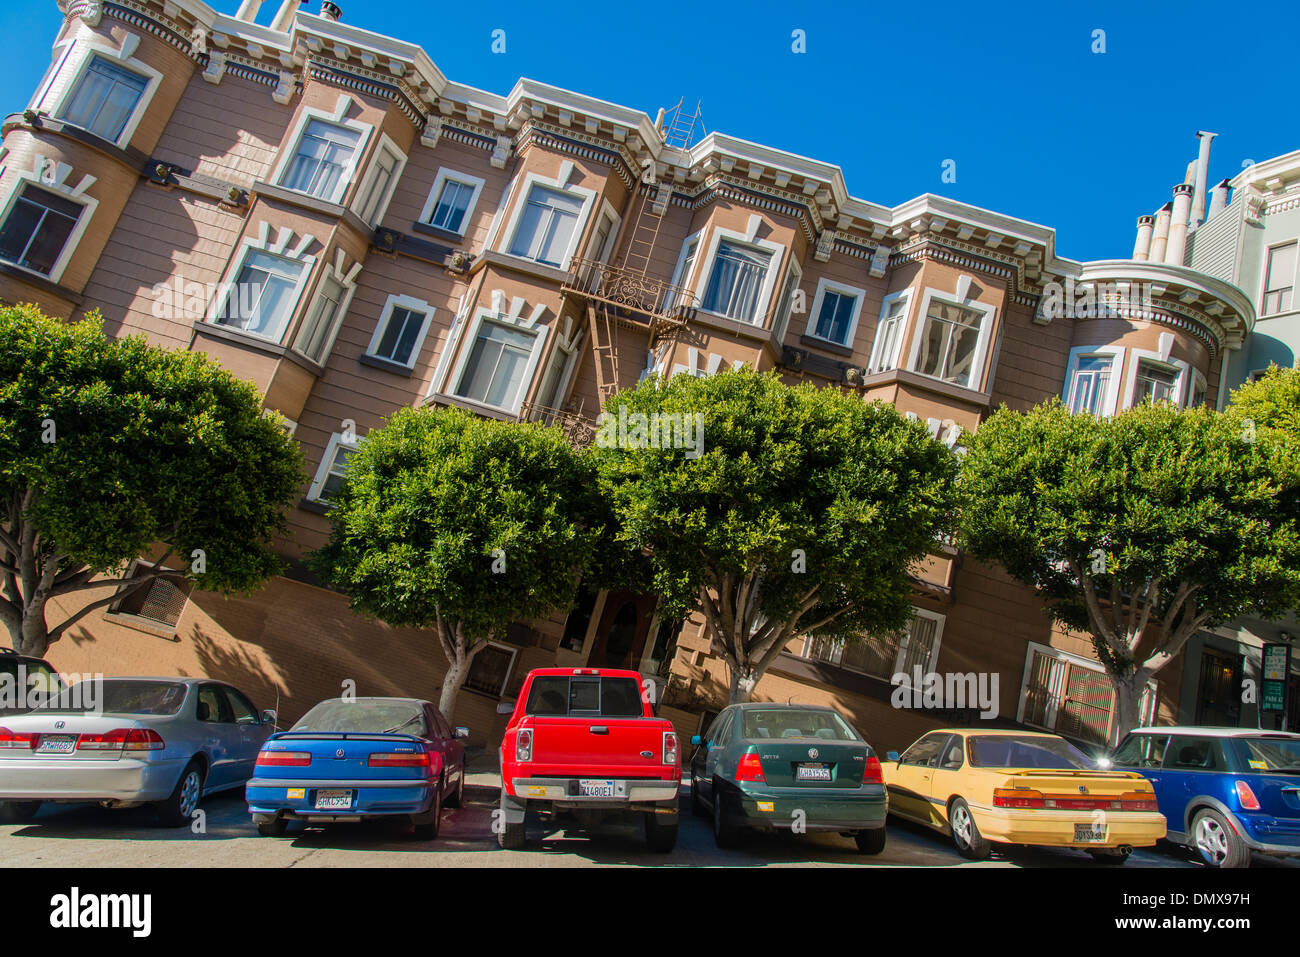 Tilted view of a typical steep street with old apartment buildings and parked cars, San Francisco, California, USA Stock Photo